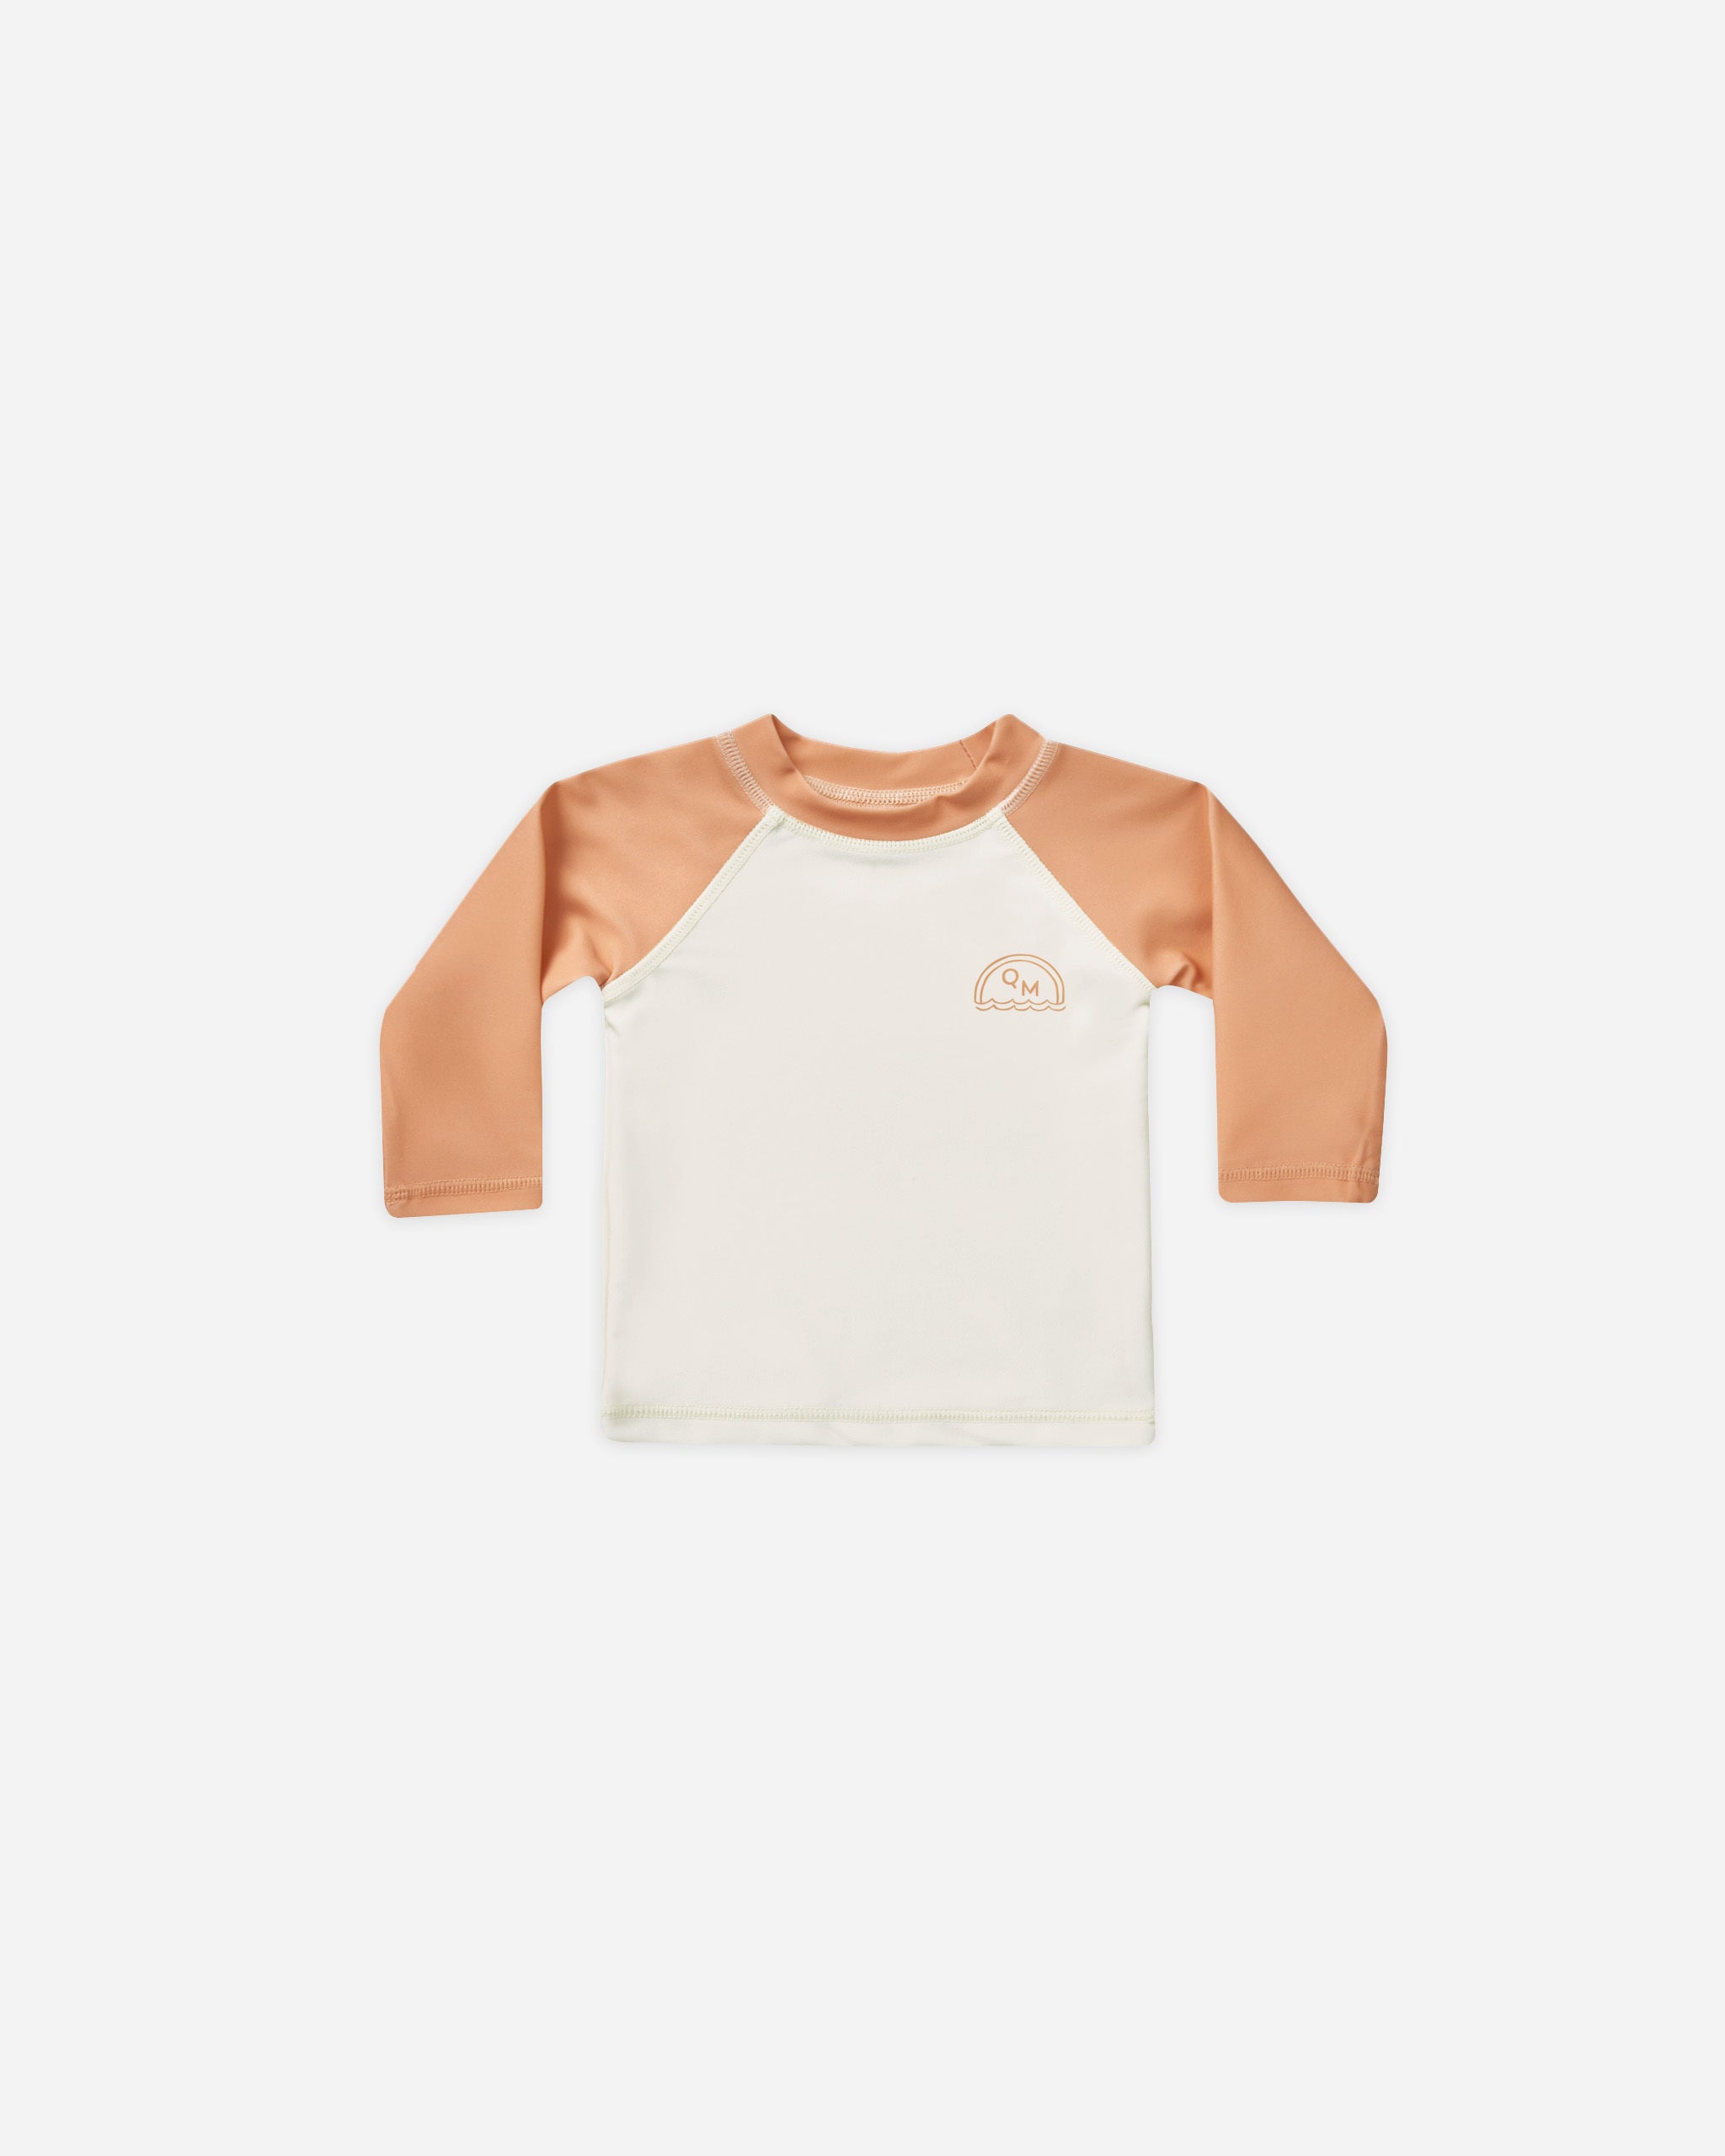 Rashguard || Melon Colorblock - Rylee + Cru | Kids Clothes | Trendy Baby Clothes | Modern Infant Outfits |